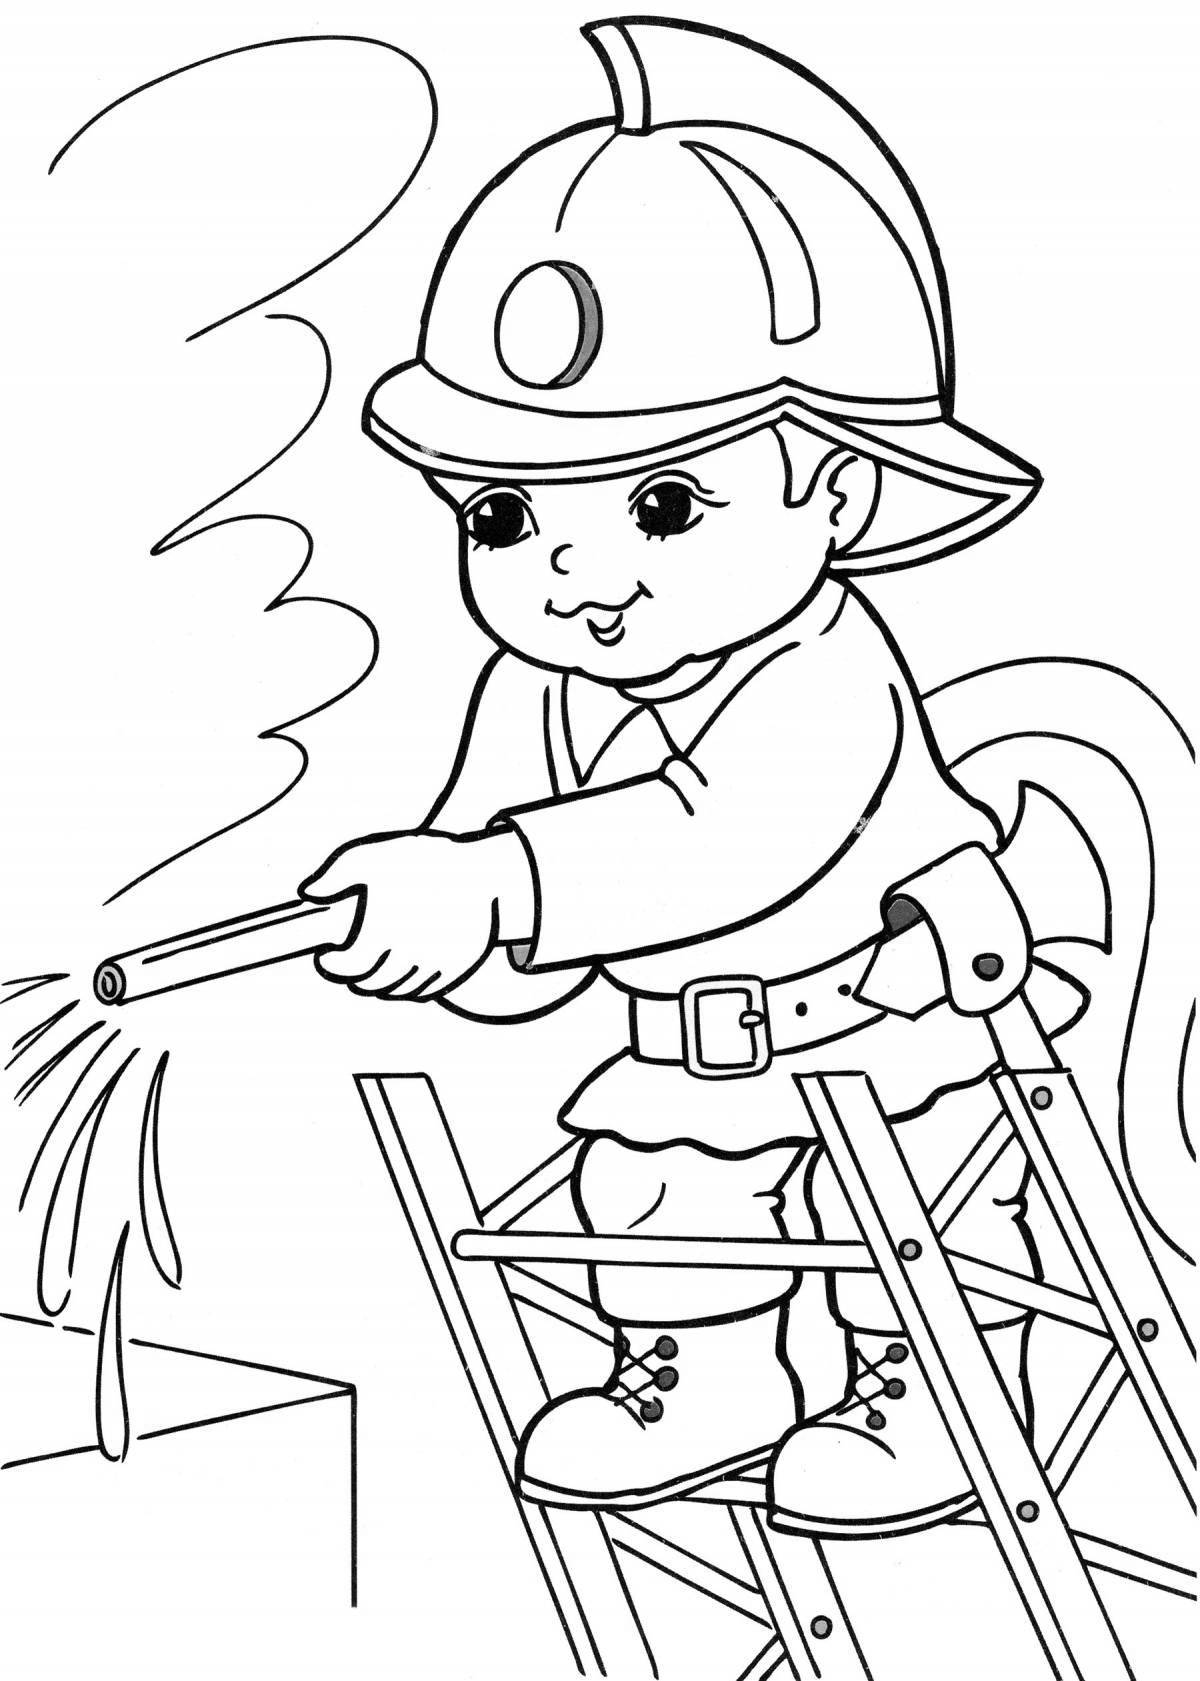 Large fireman coloring page